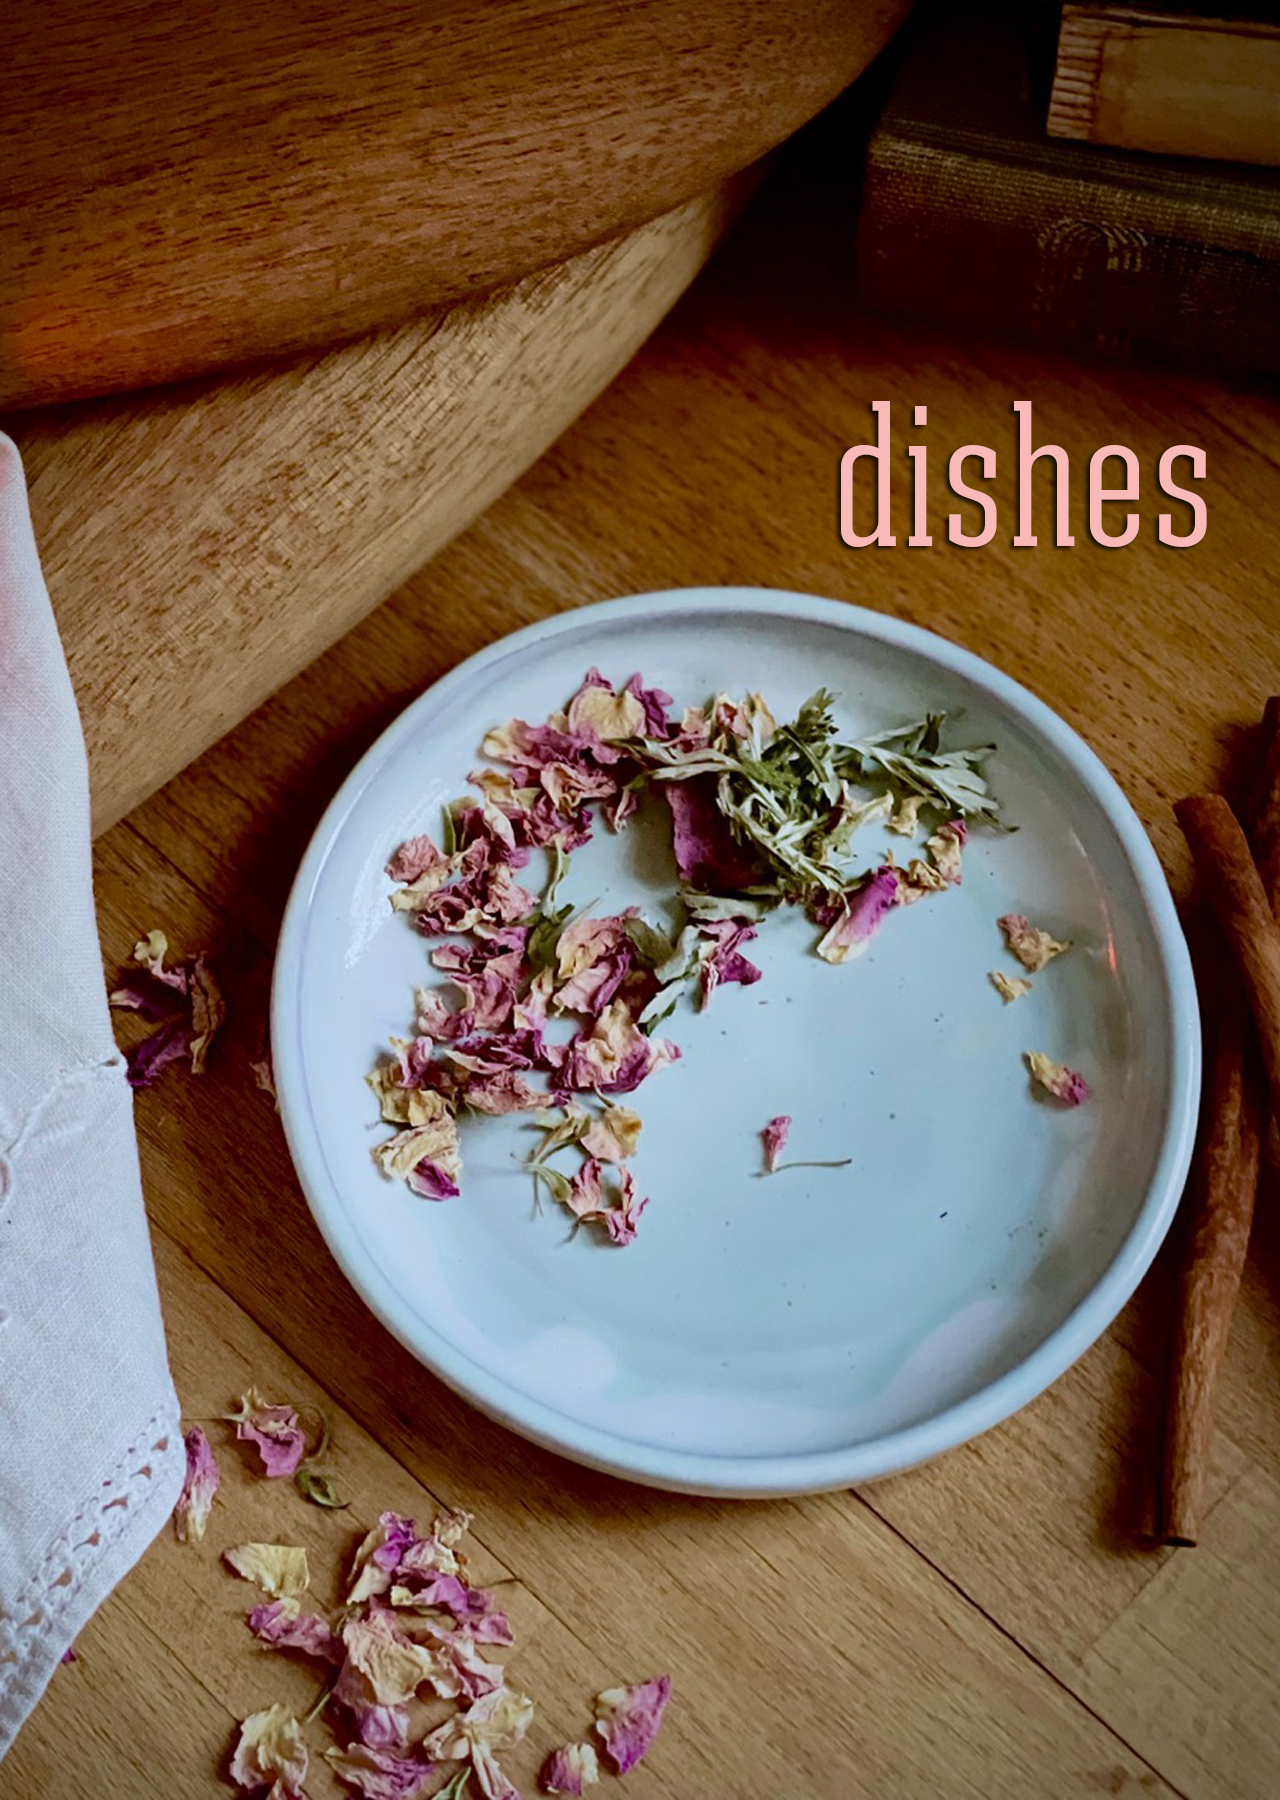 Icy blue glazed dish shown on a warm wood surface styled with dried rose petals, cinnamon sticks, and dried mugwort